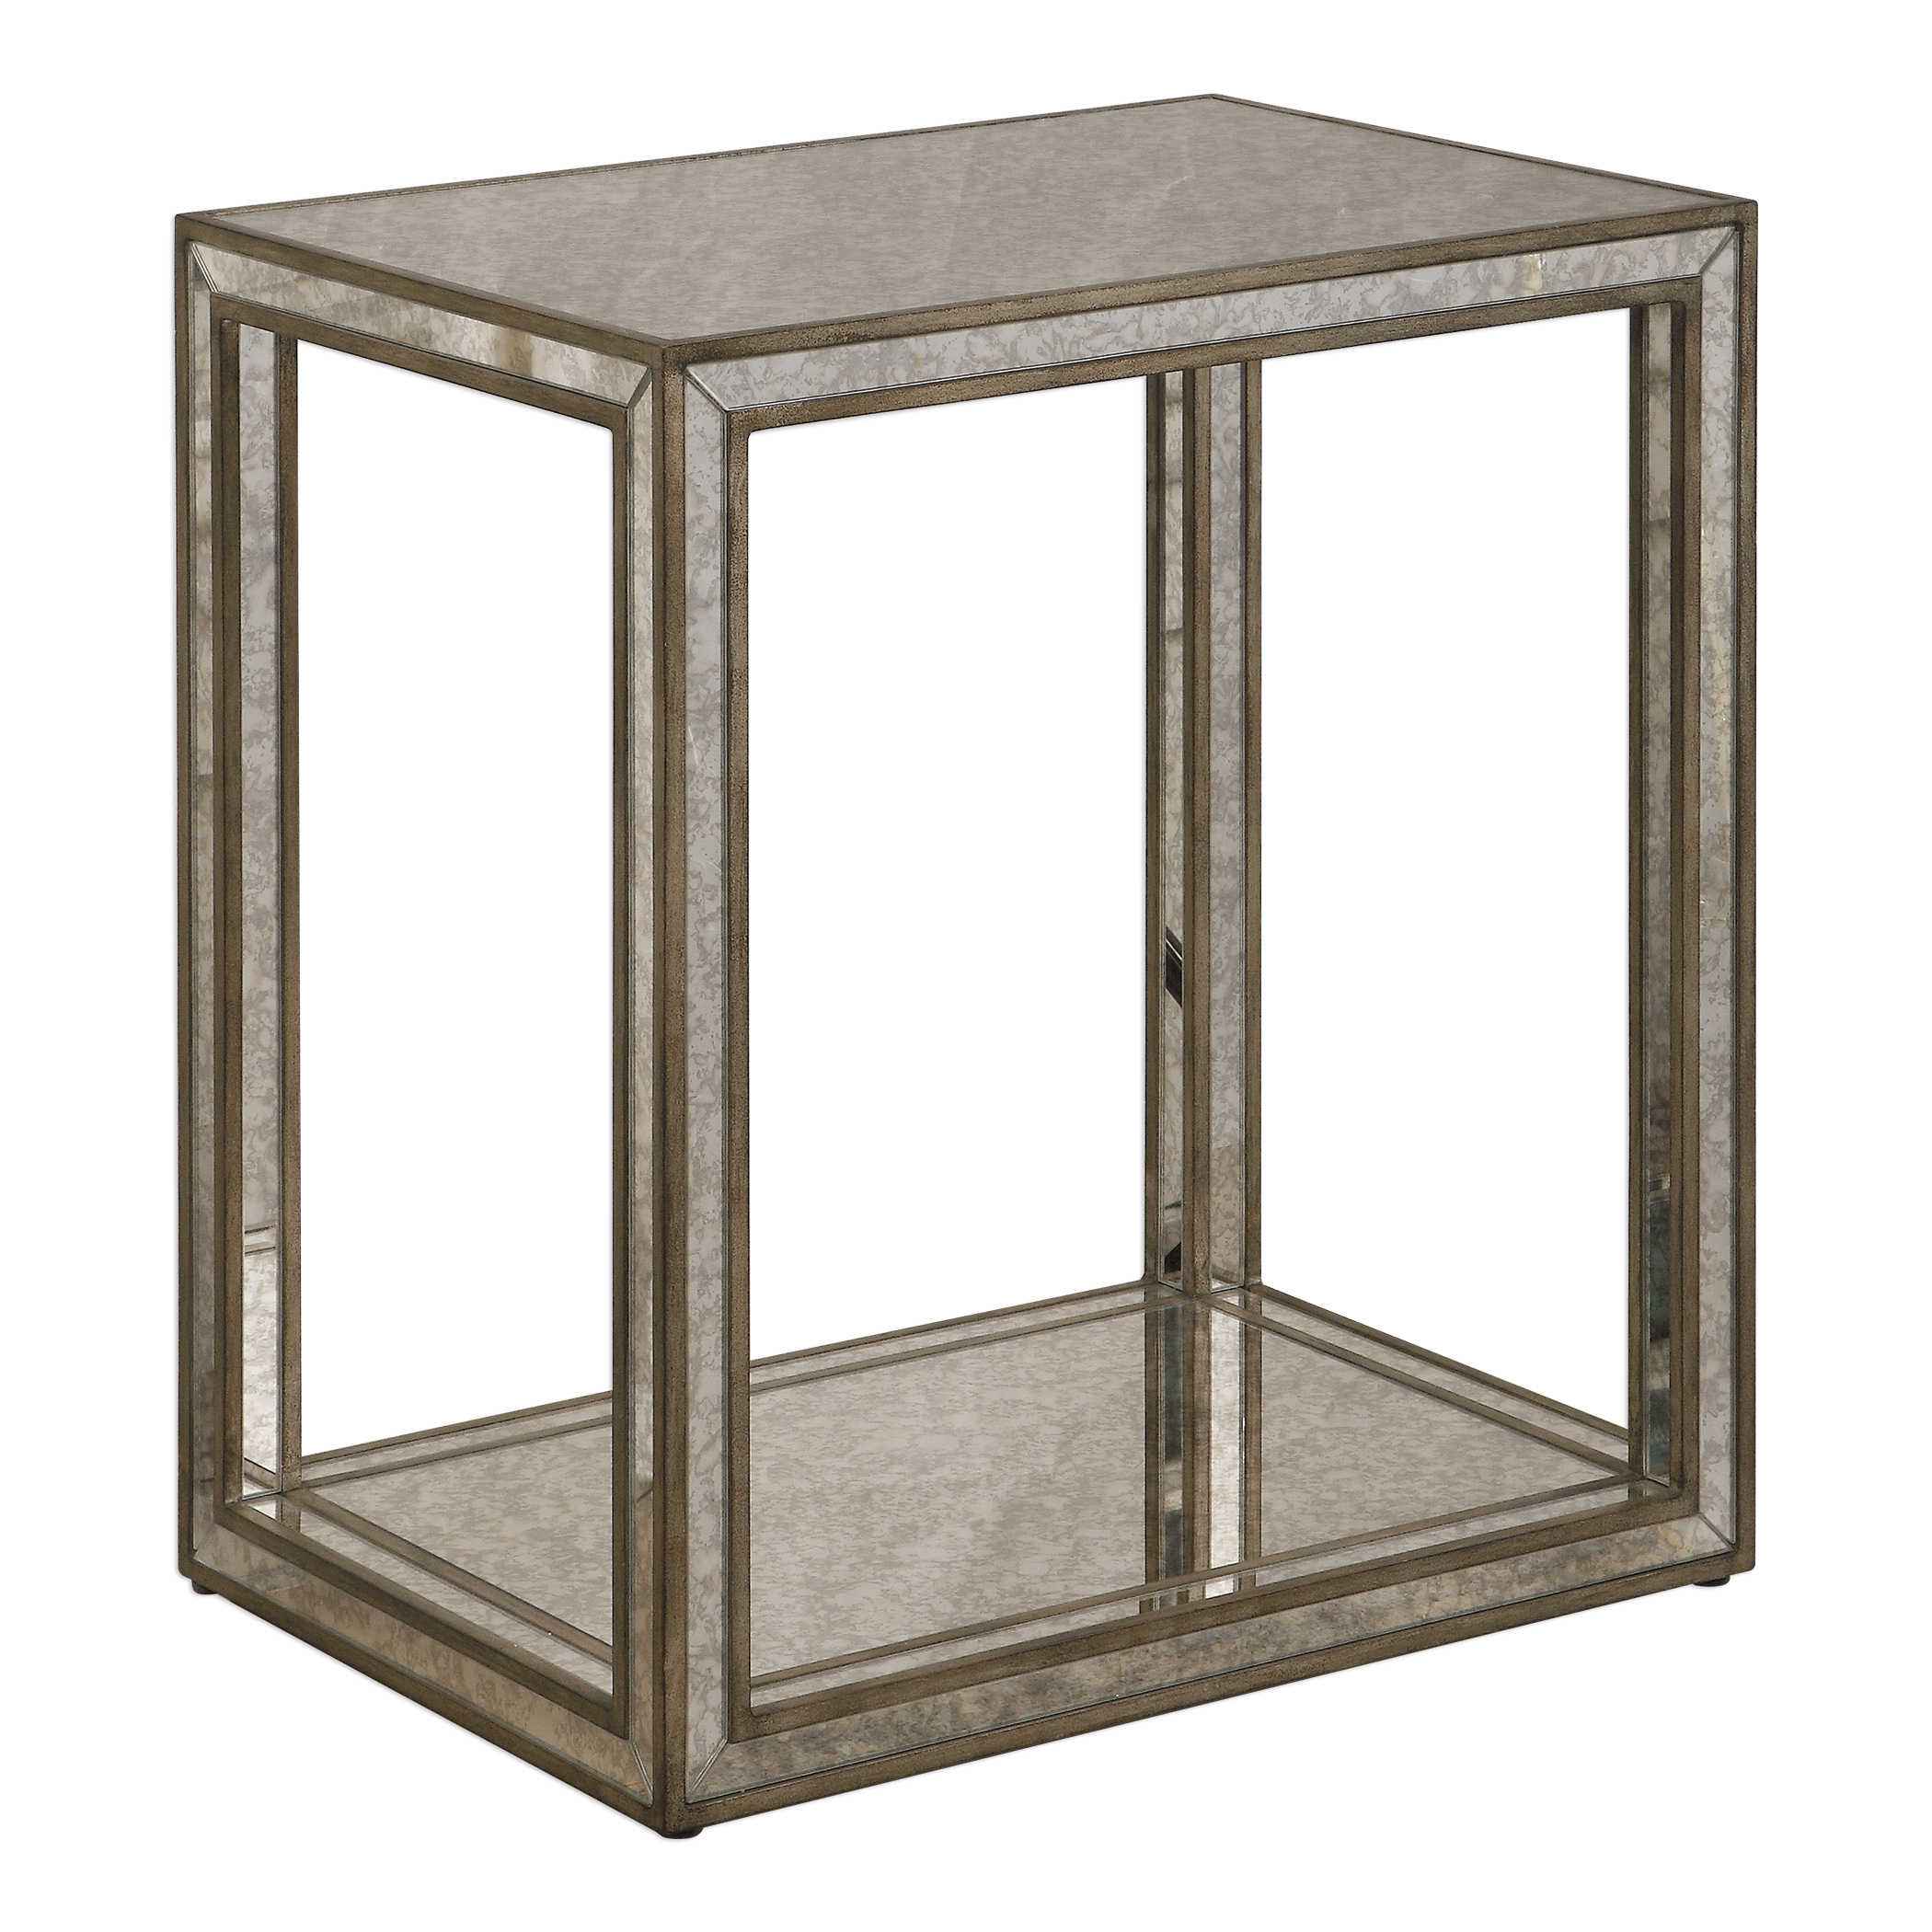 Mirrored End Table-$750.00